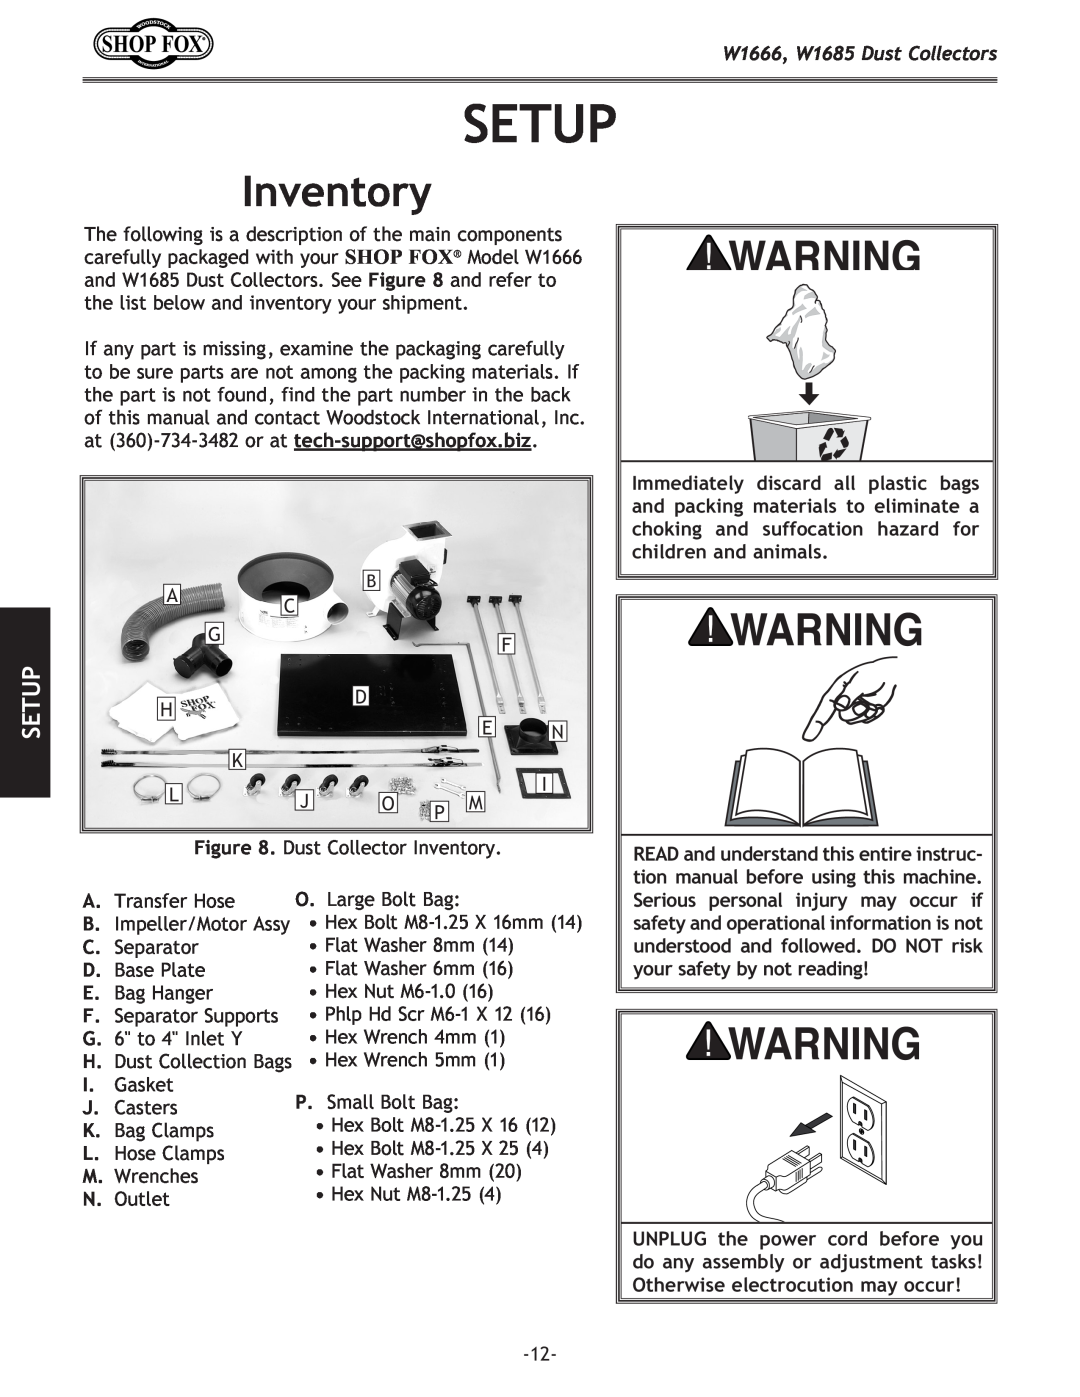 Woodstock DUST COLLECTORS instruction manual Setup, Inventory, W1666, W1685 Dust Collectors 